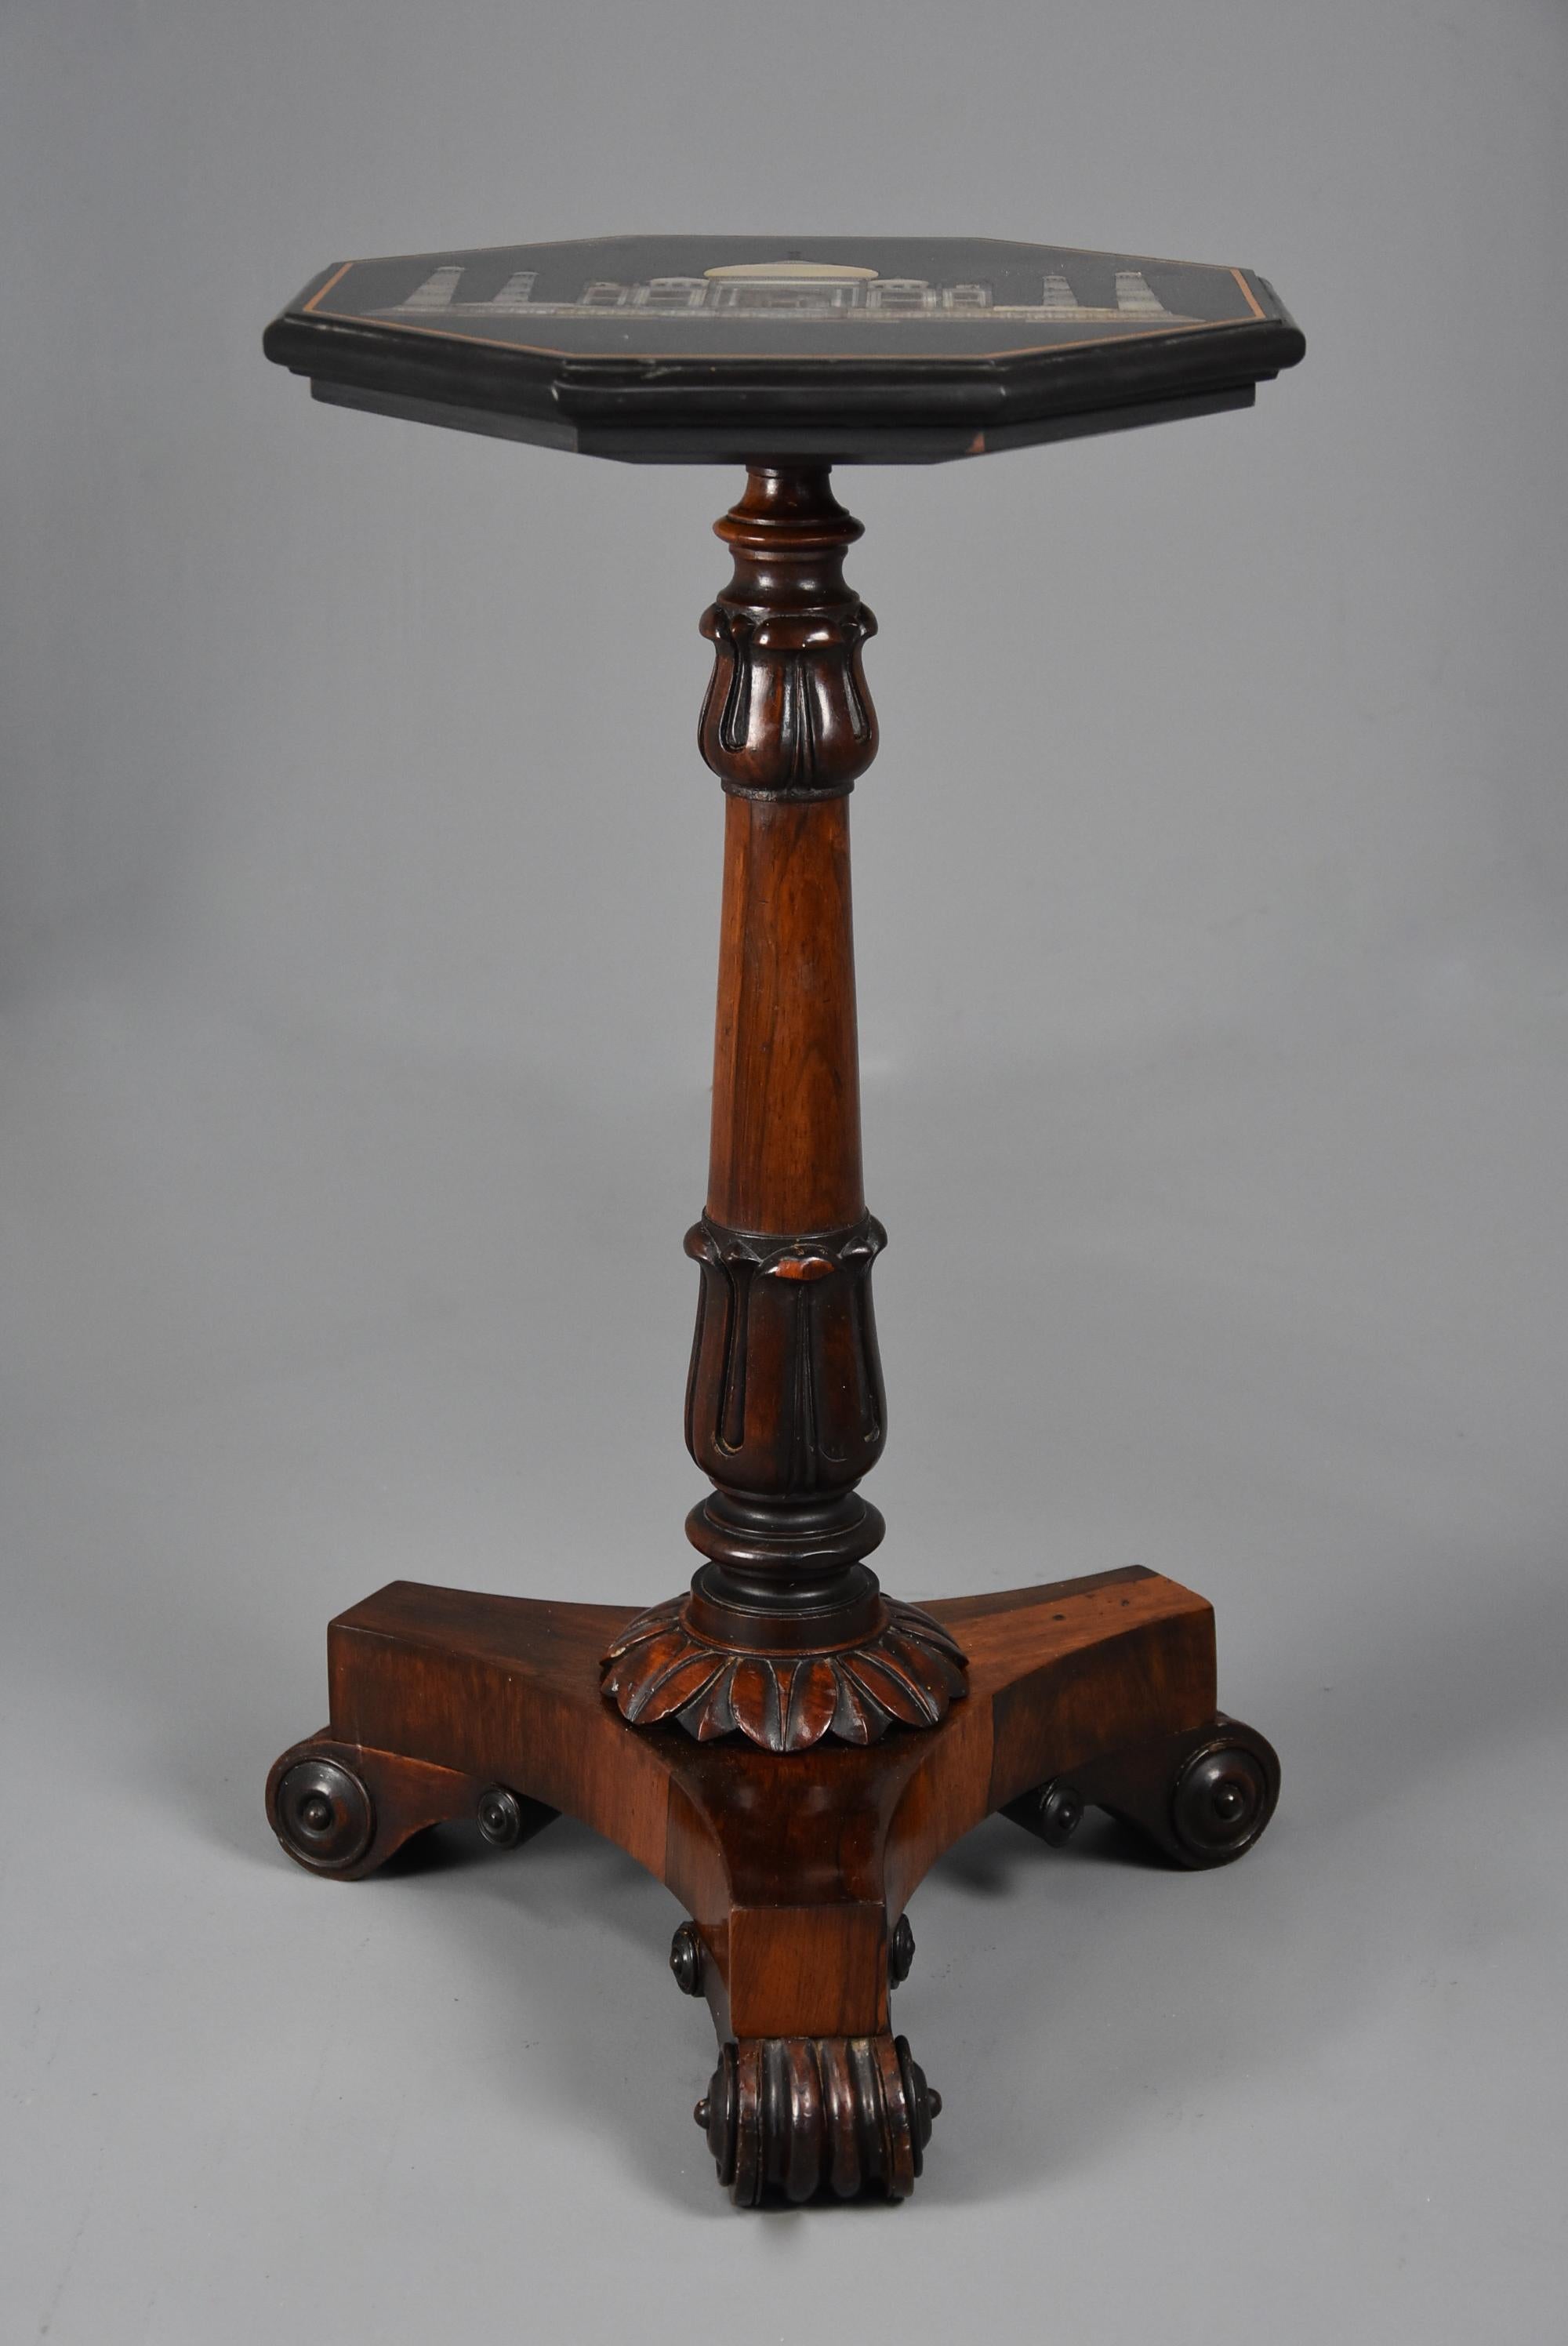 A 19th century (circa 1830) occasional table with highly decorative octagonal polished slate top with finely inlaid and engraved mother of pearl design of the Taj Mahal with inlaid stringing and moulded edge.

The top is supported by a tri-form